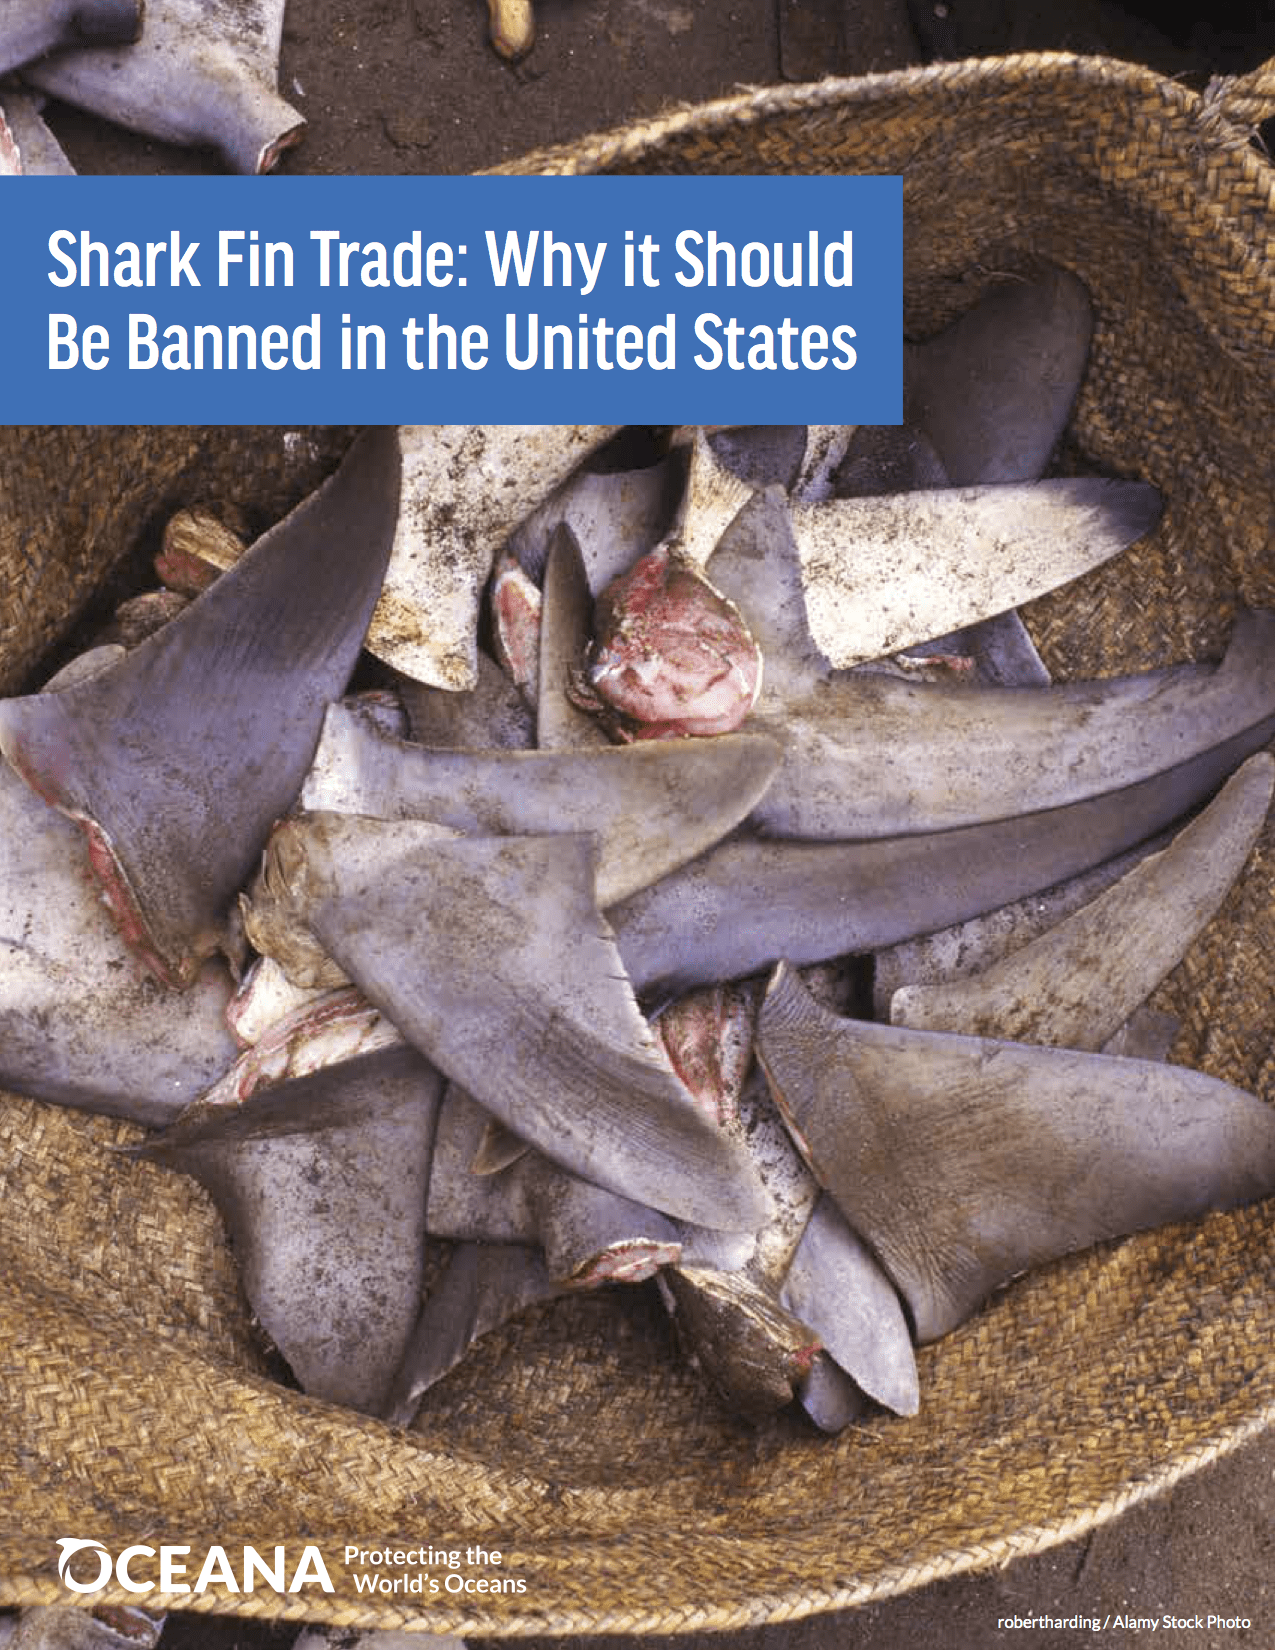 Shark fin is banned in 12 U.S. states—but it's still on the menu